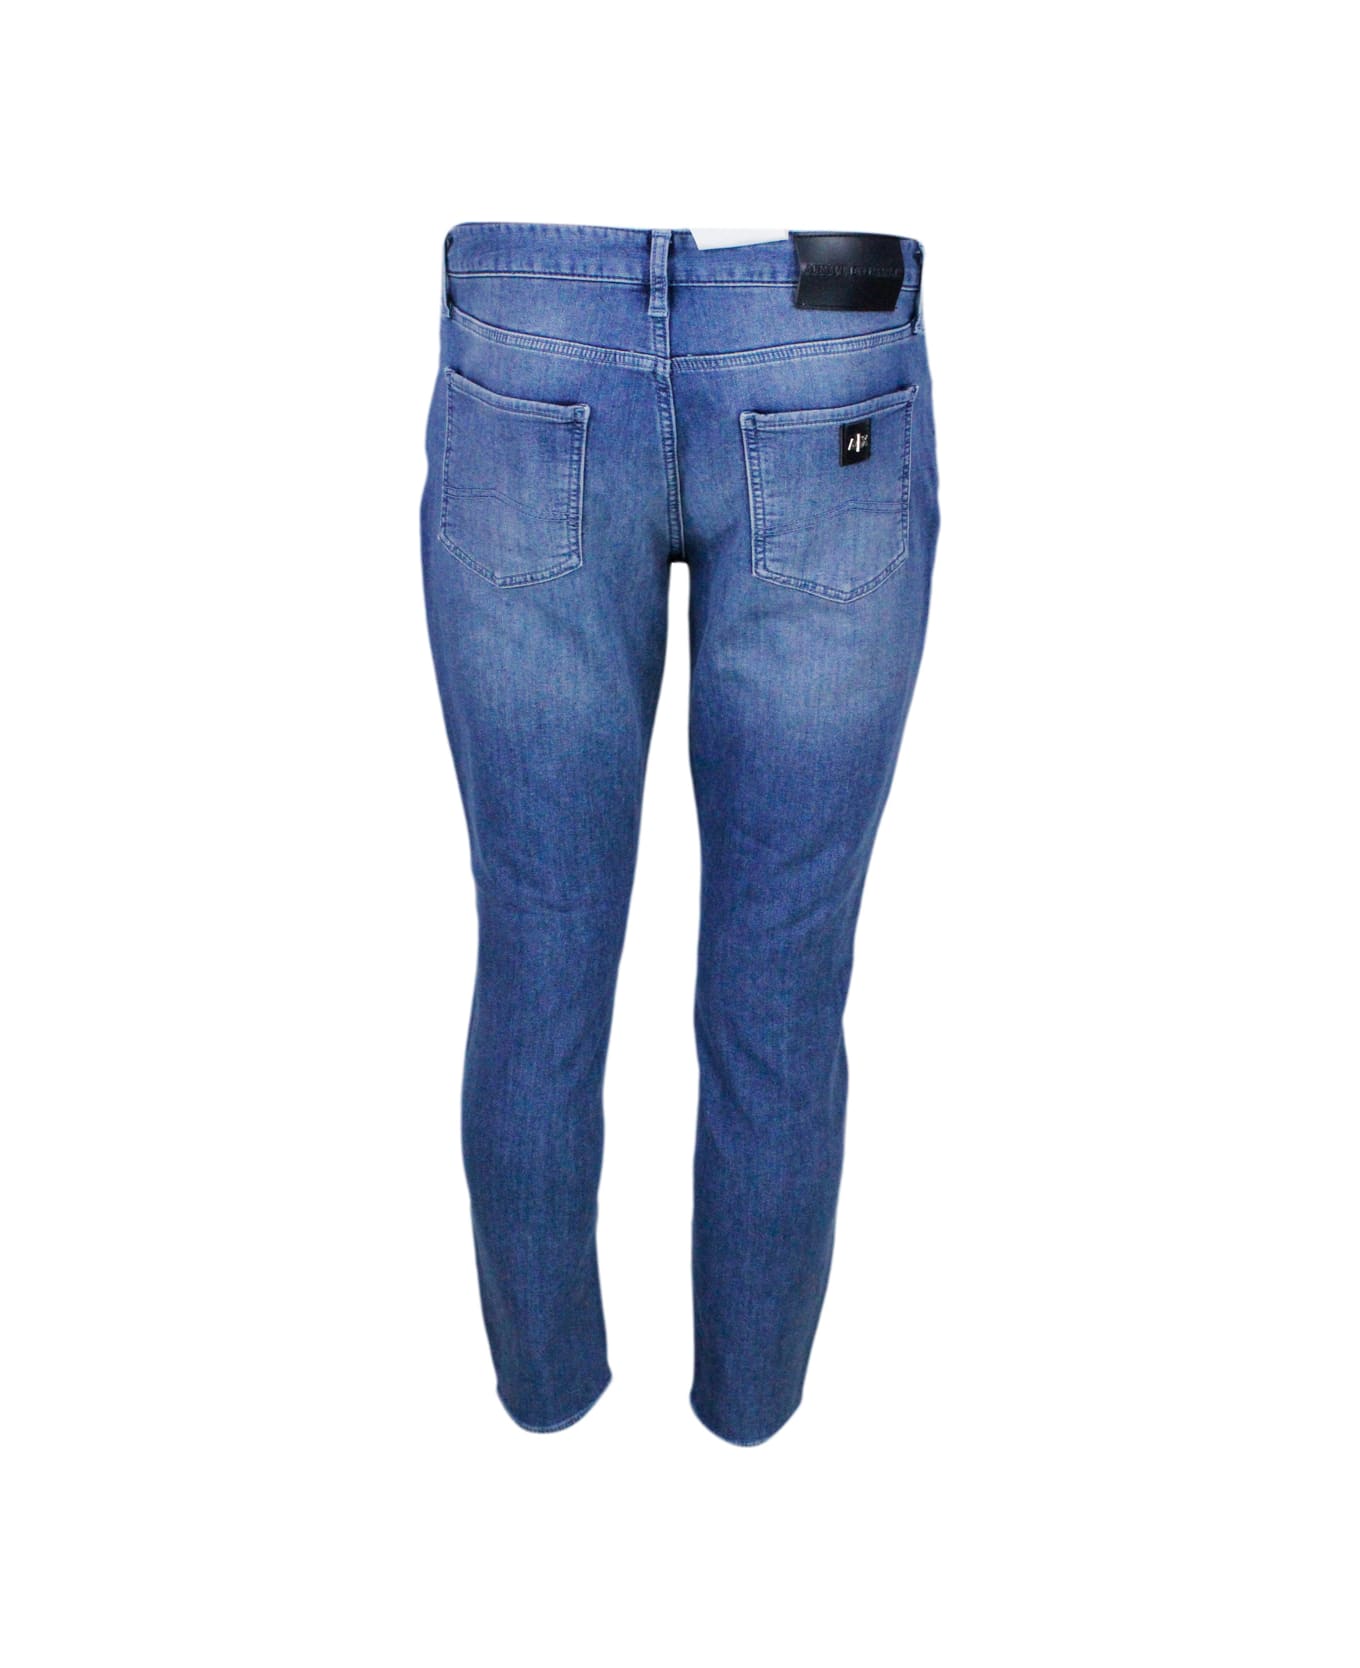 Armani Collezioni Skinny Jeans In Soft Stretch Denim With Matching Stitching And Leather Tab. Zip And Button Closure - Denim